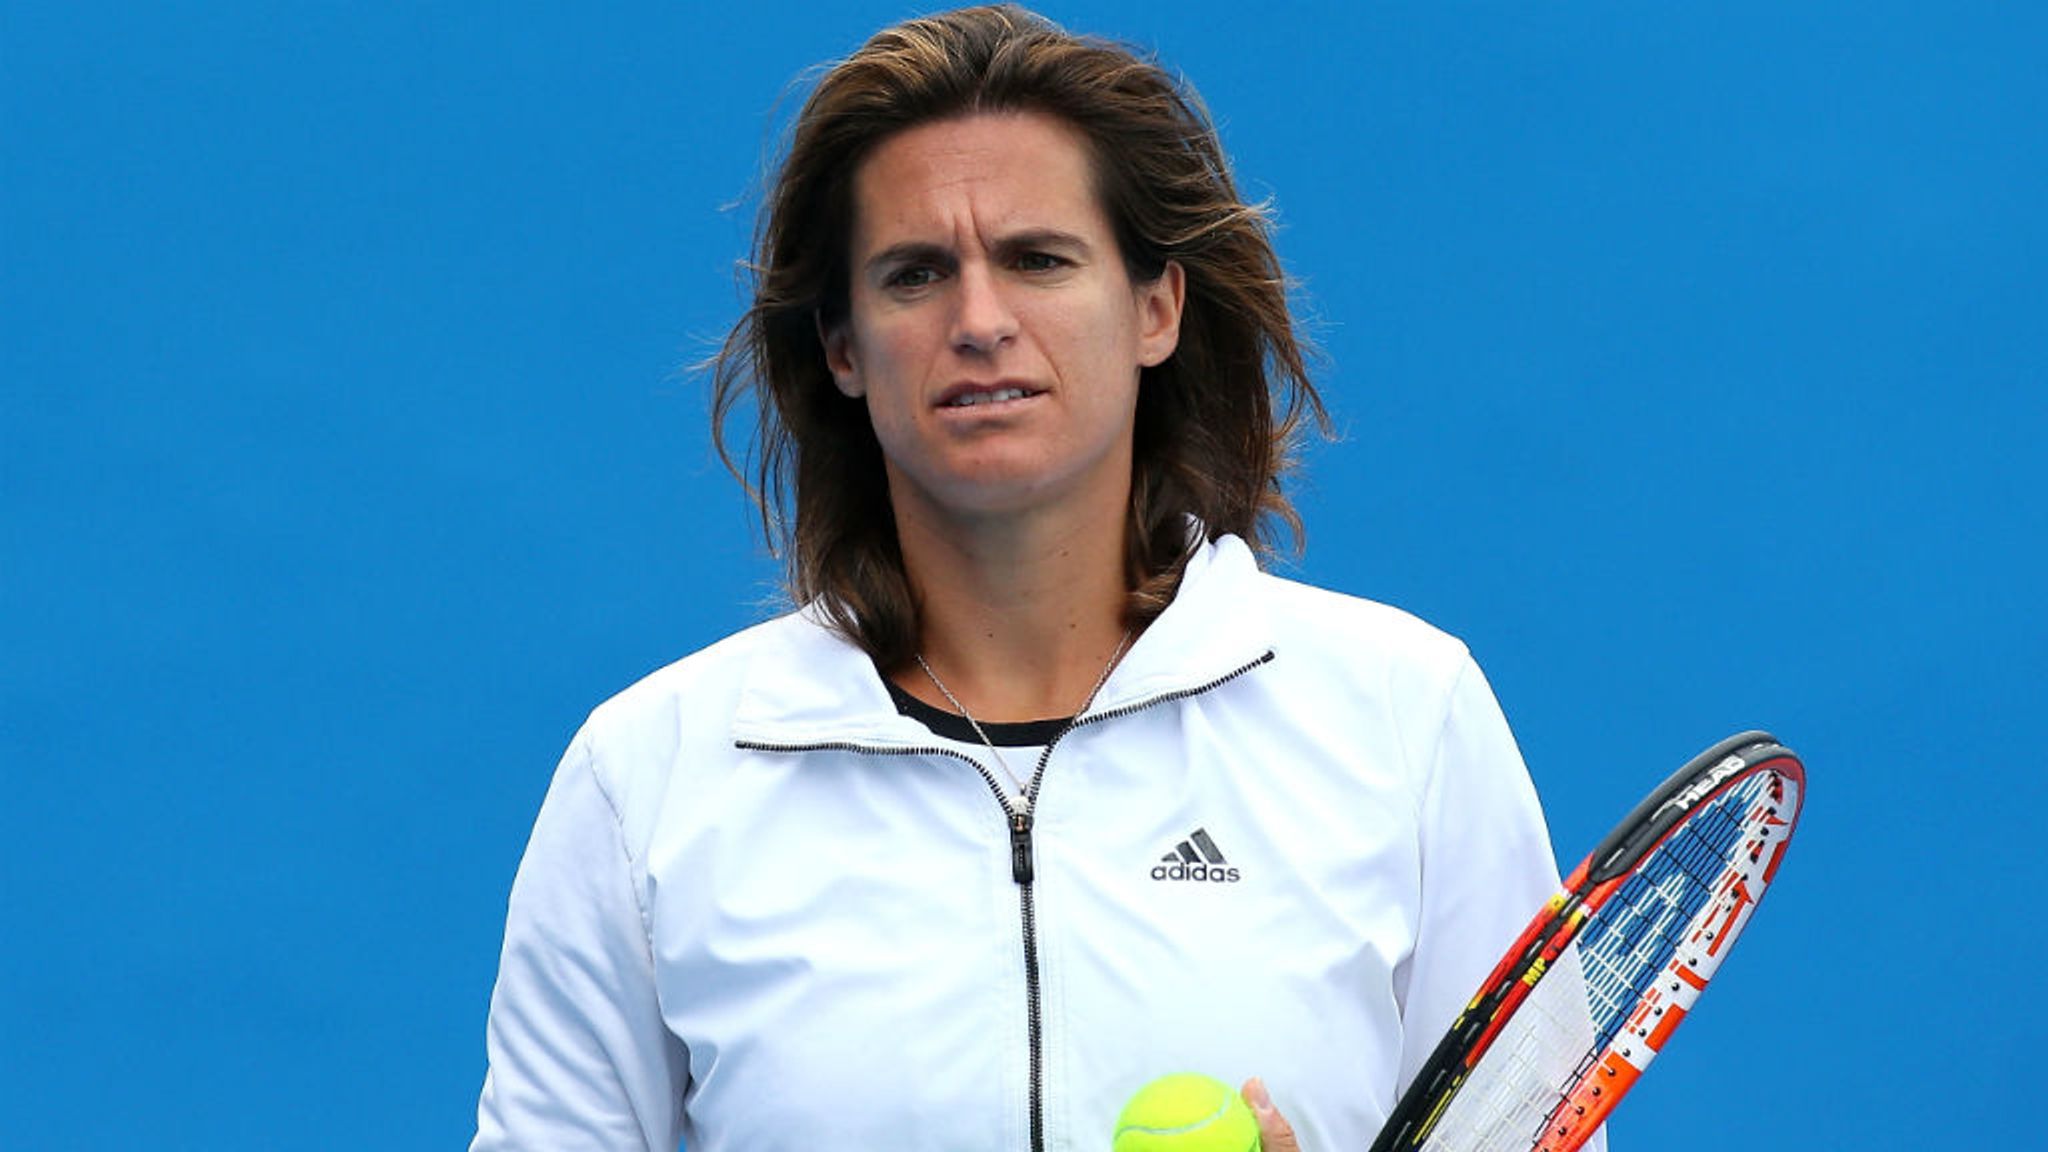 16-facts-about-amelie-mauresmo